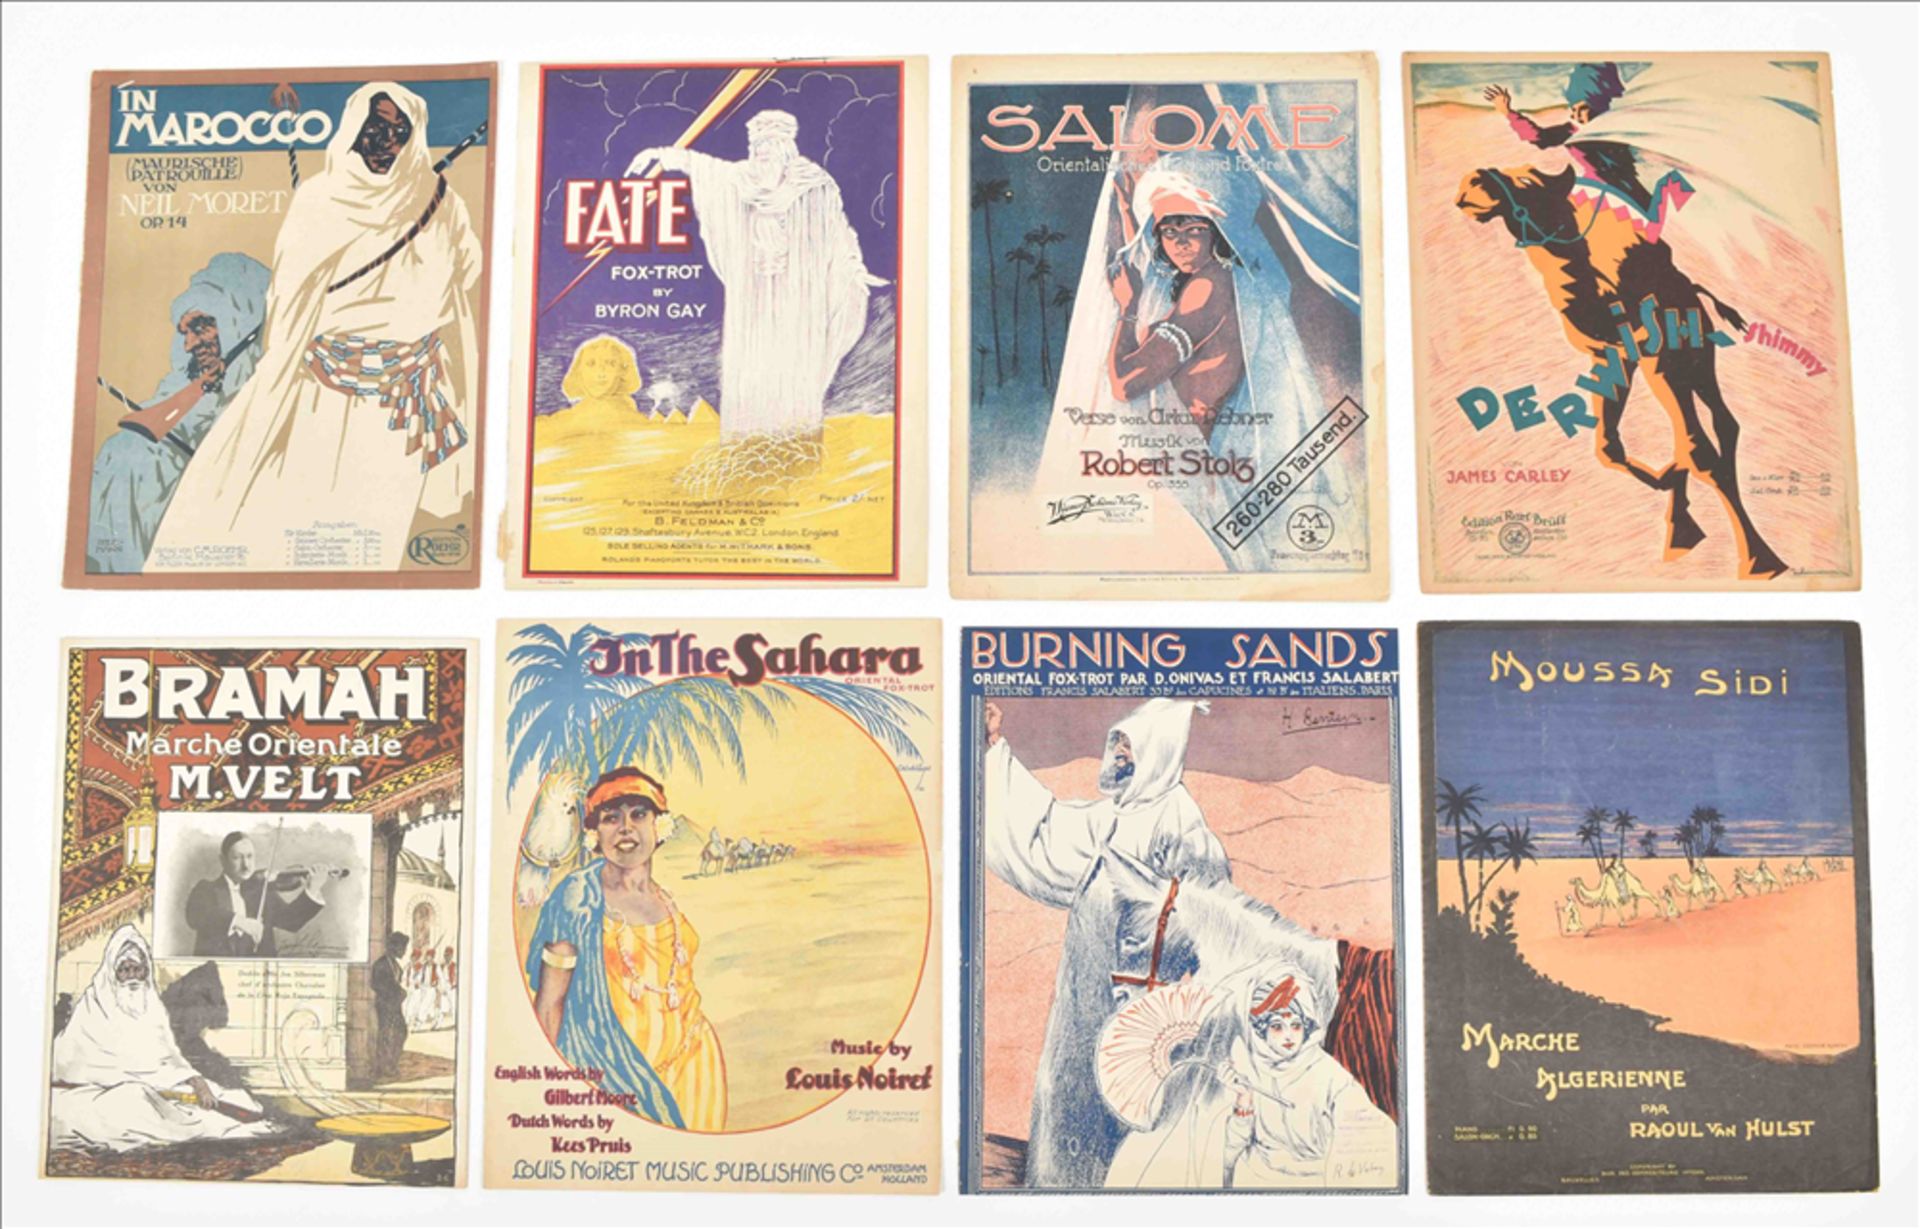 18 pieces of sheet music with oriental and Egyptian themed covers or songs. - Bild 4 aus 8